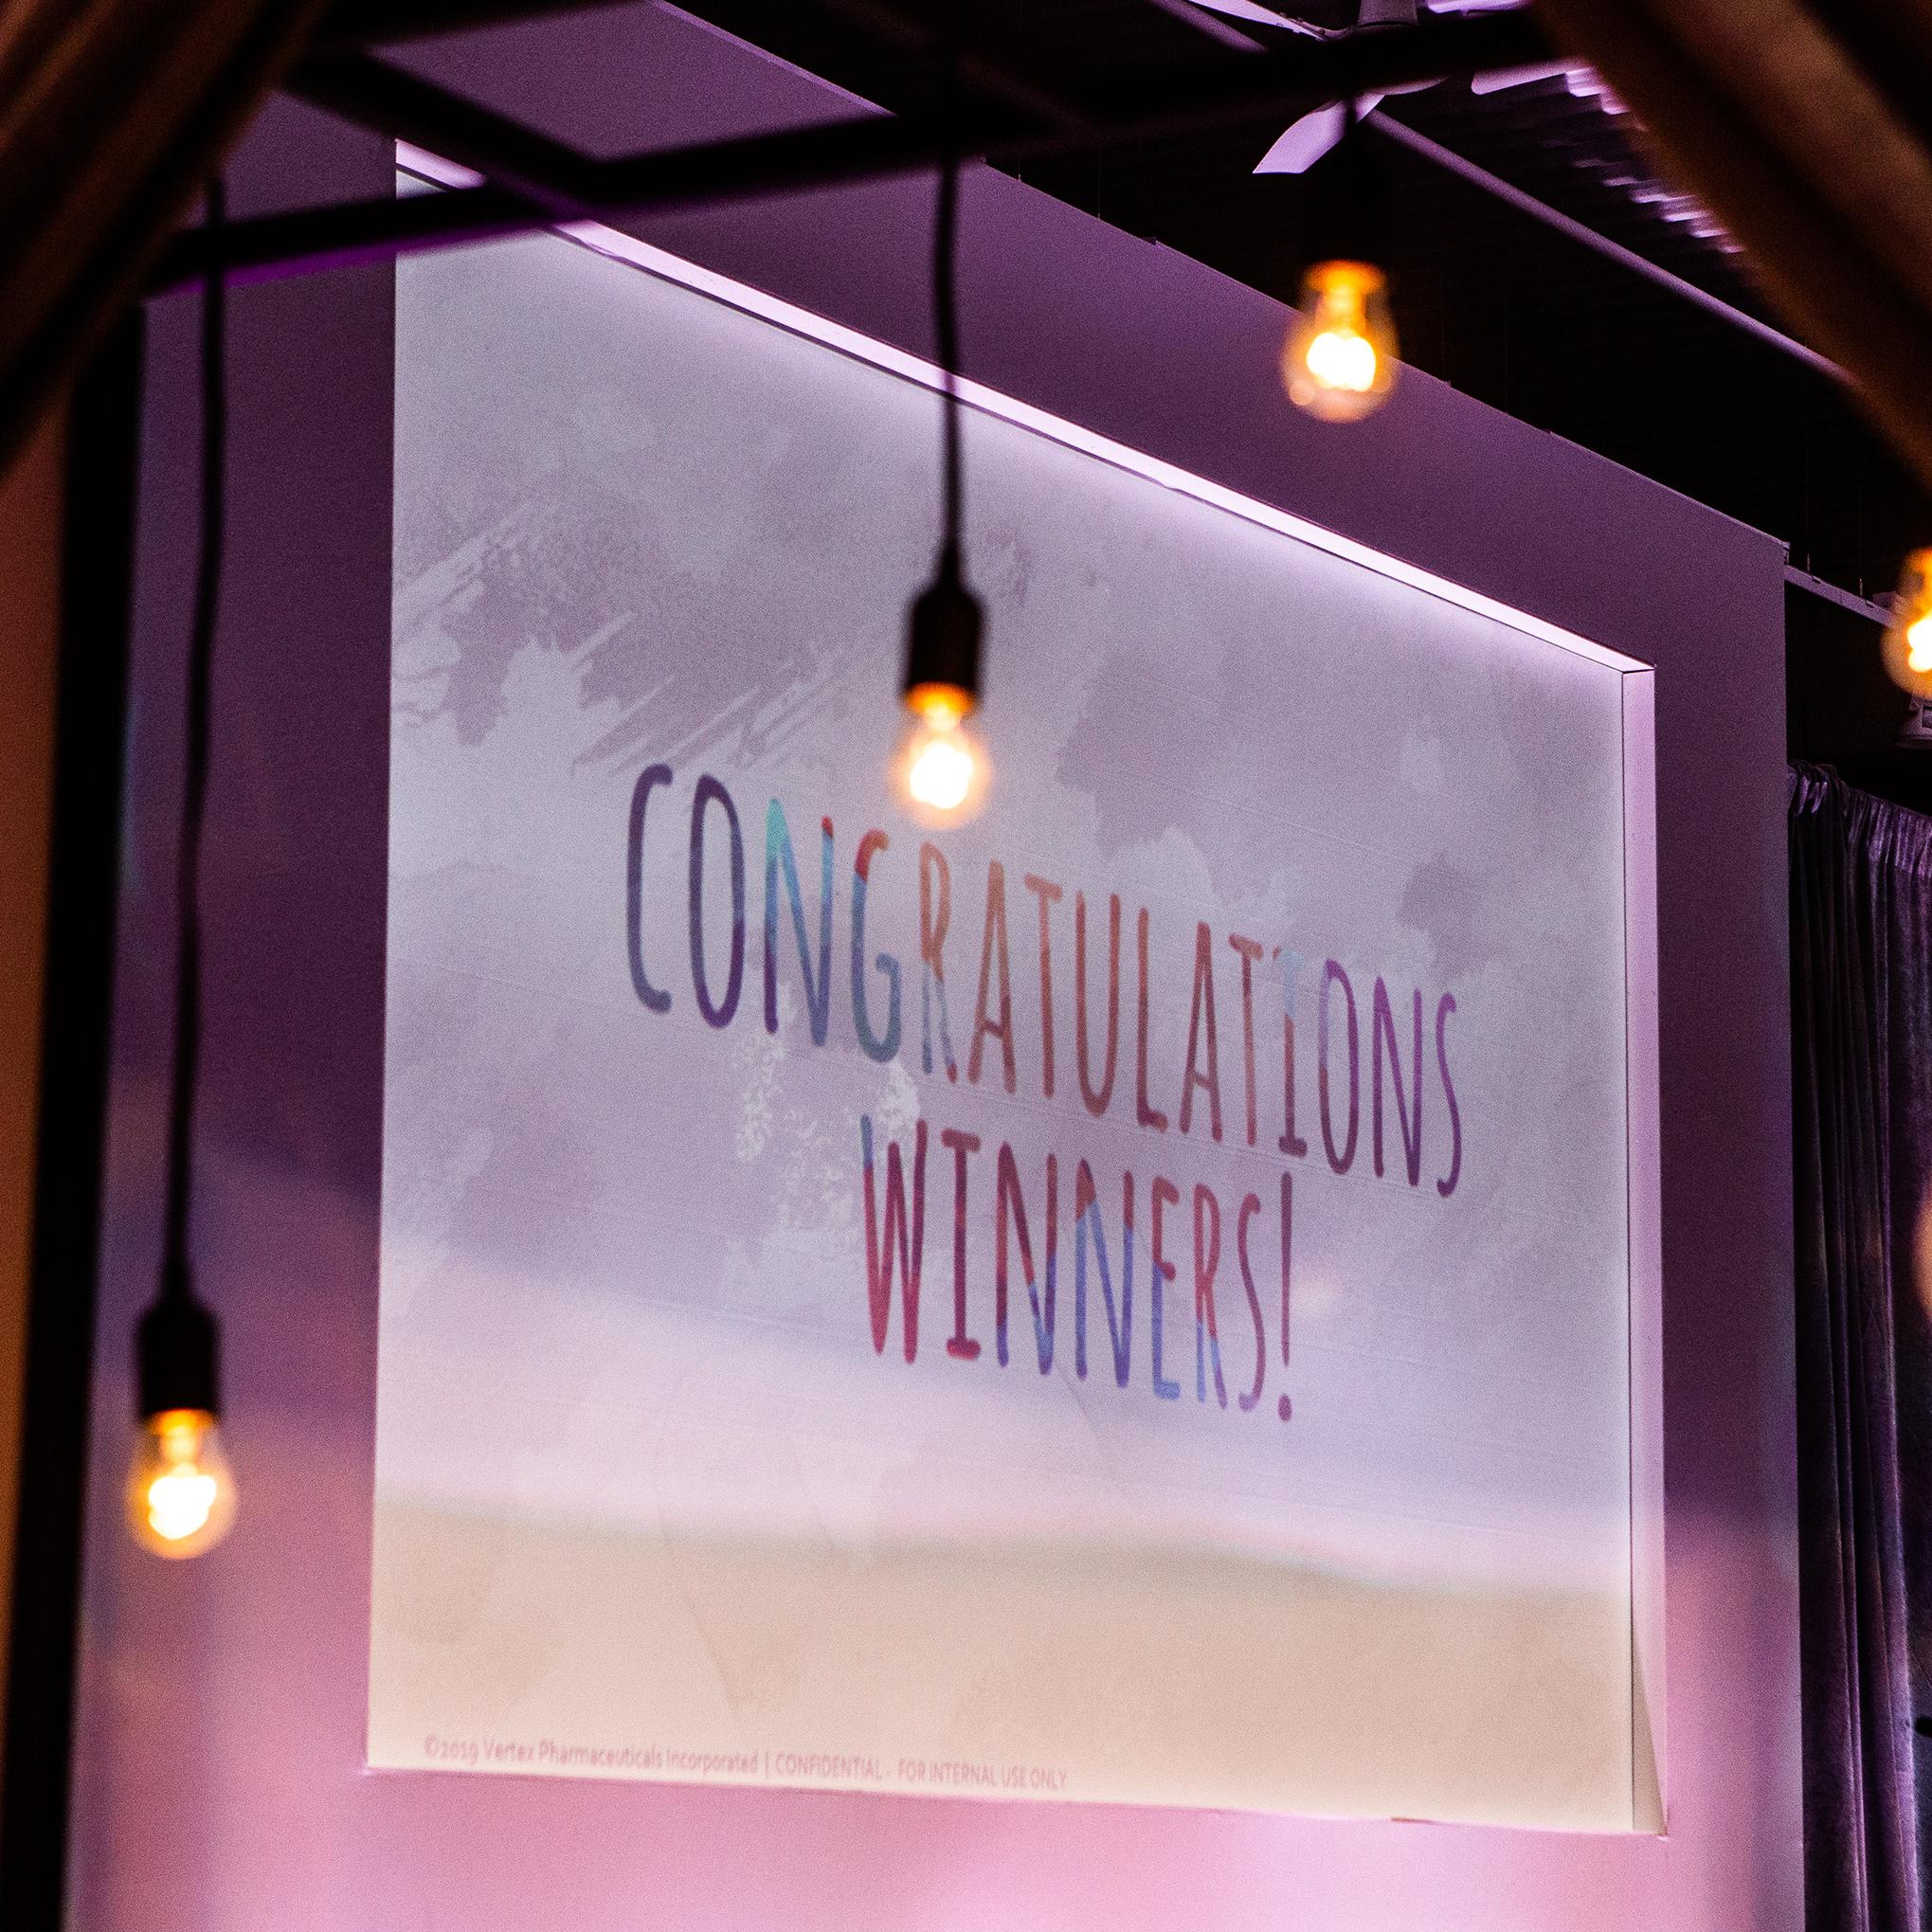 An image on a screen says "Congratulations, winners!"